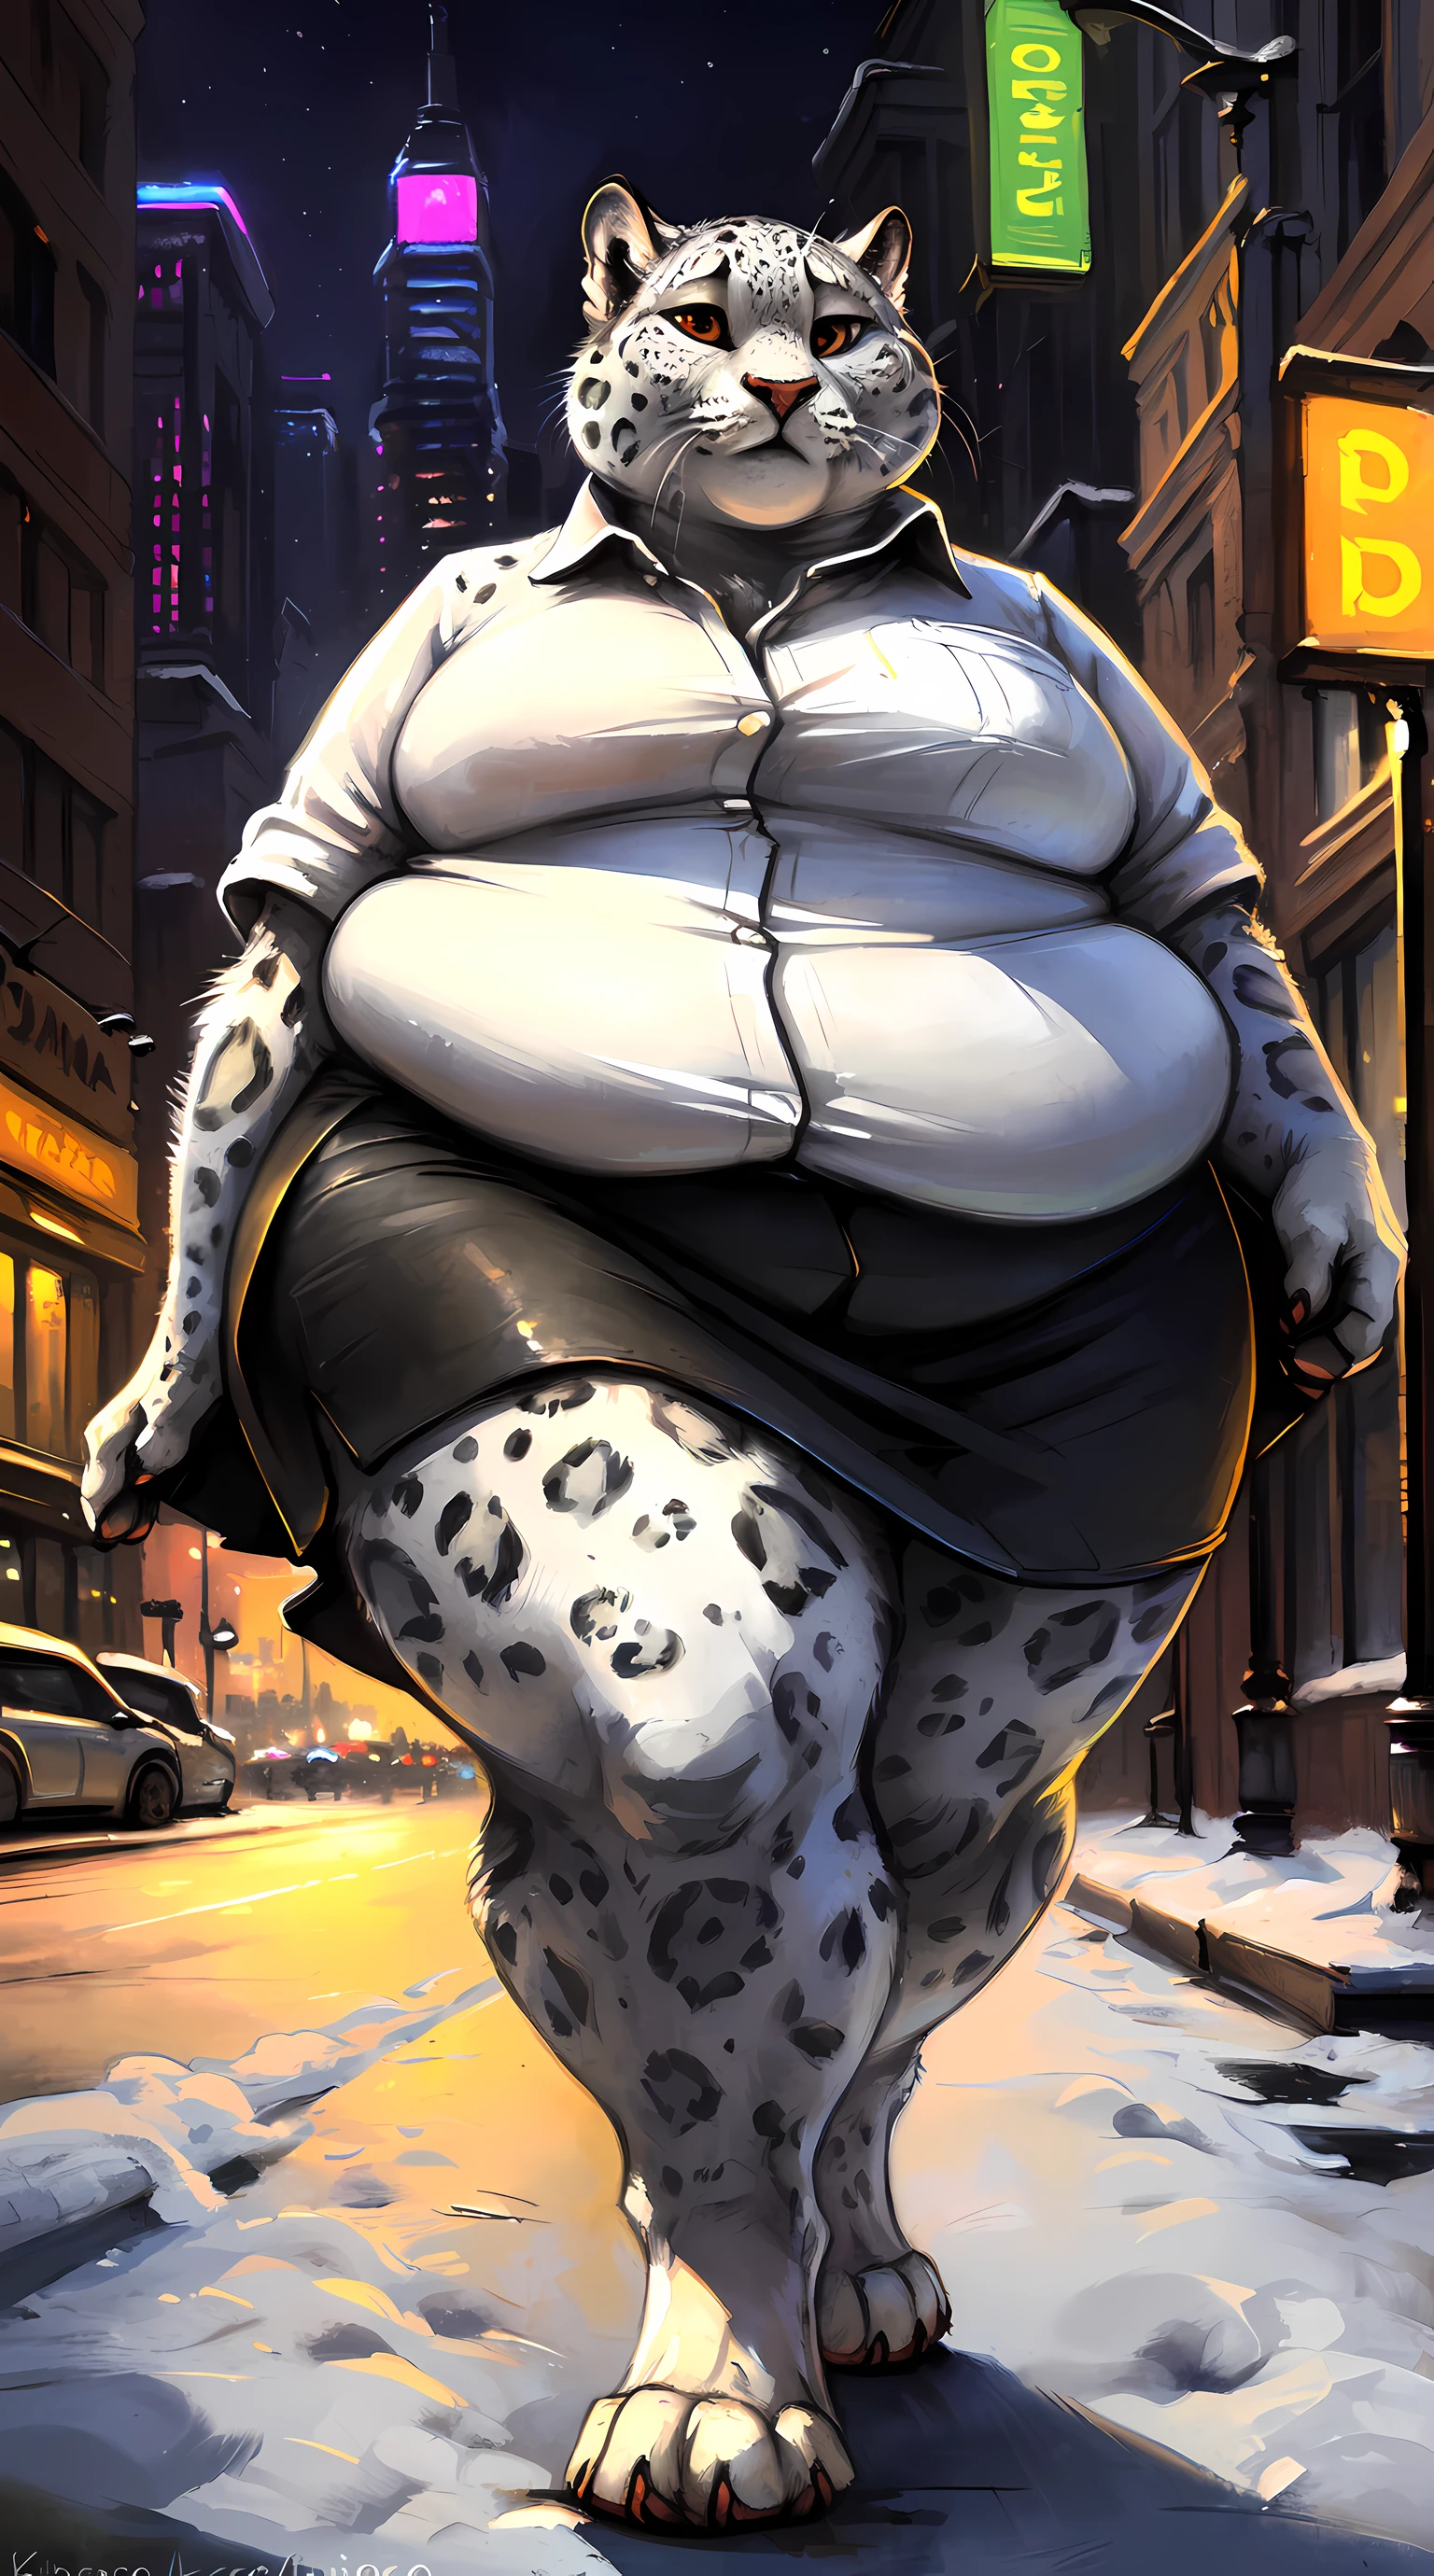 solo, ((snow leopard)), ((obese female:1.6)), feral, ((pudgy belly, huge belly, huge thighs)), (unfit, out of shape, small breasts), paws, 4 toes, four toes, [4 fingers, four fingers], (digitigrade), whiskers, glamour, ((tight skirt, pencil skirt, long shirt, white collared shirt, tight clothes, straining buttons, too tight shirt, outgrown shirt, low rise skirt, evening, city, walking, strolling, neon, lights, dark)), detailed background, masterpiece, best quality, detailed, realistic, (morbidly obese, symmetrical), (feline, pantherine), ((by kenket, by siroc, by inno-sjoa, by carrot,)), clear eyes, detailed eyes, (symmetrical eyes,) tail, (full length portrait, fullbody)